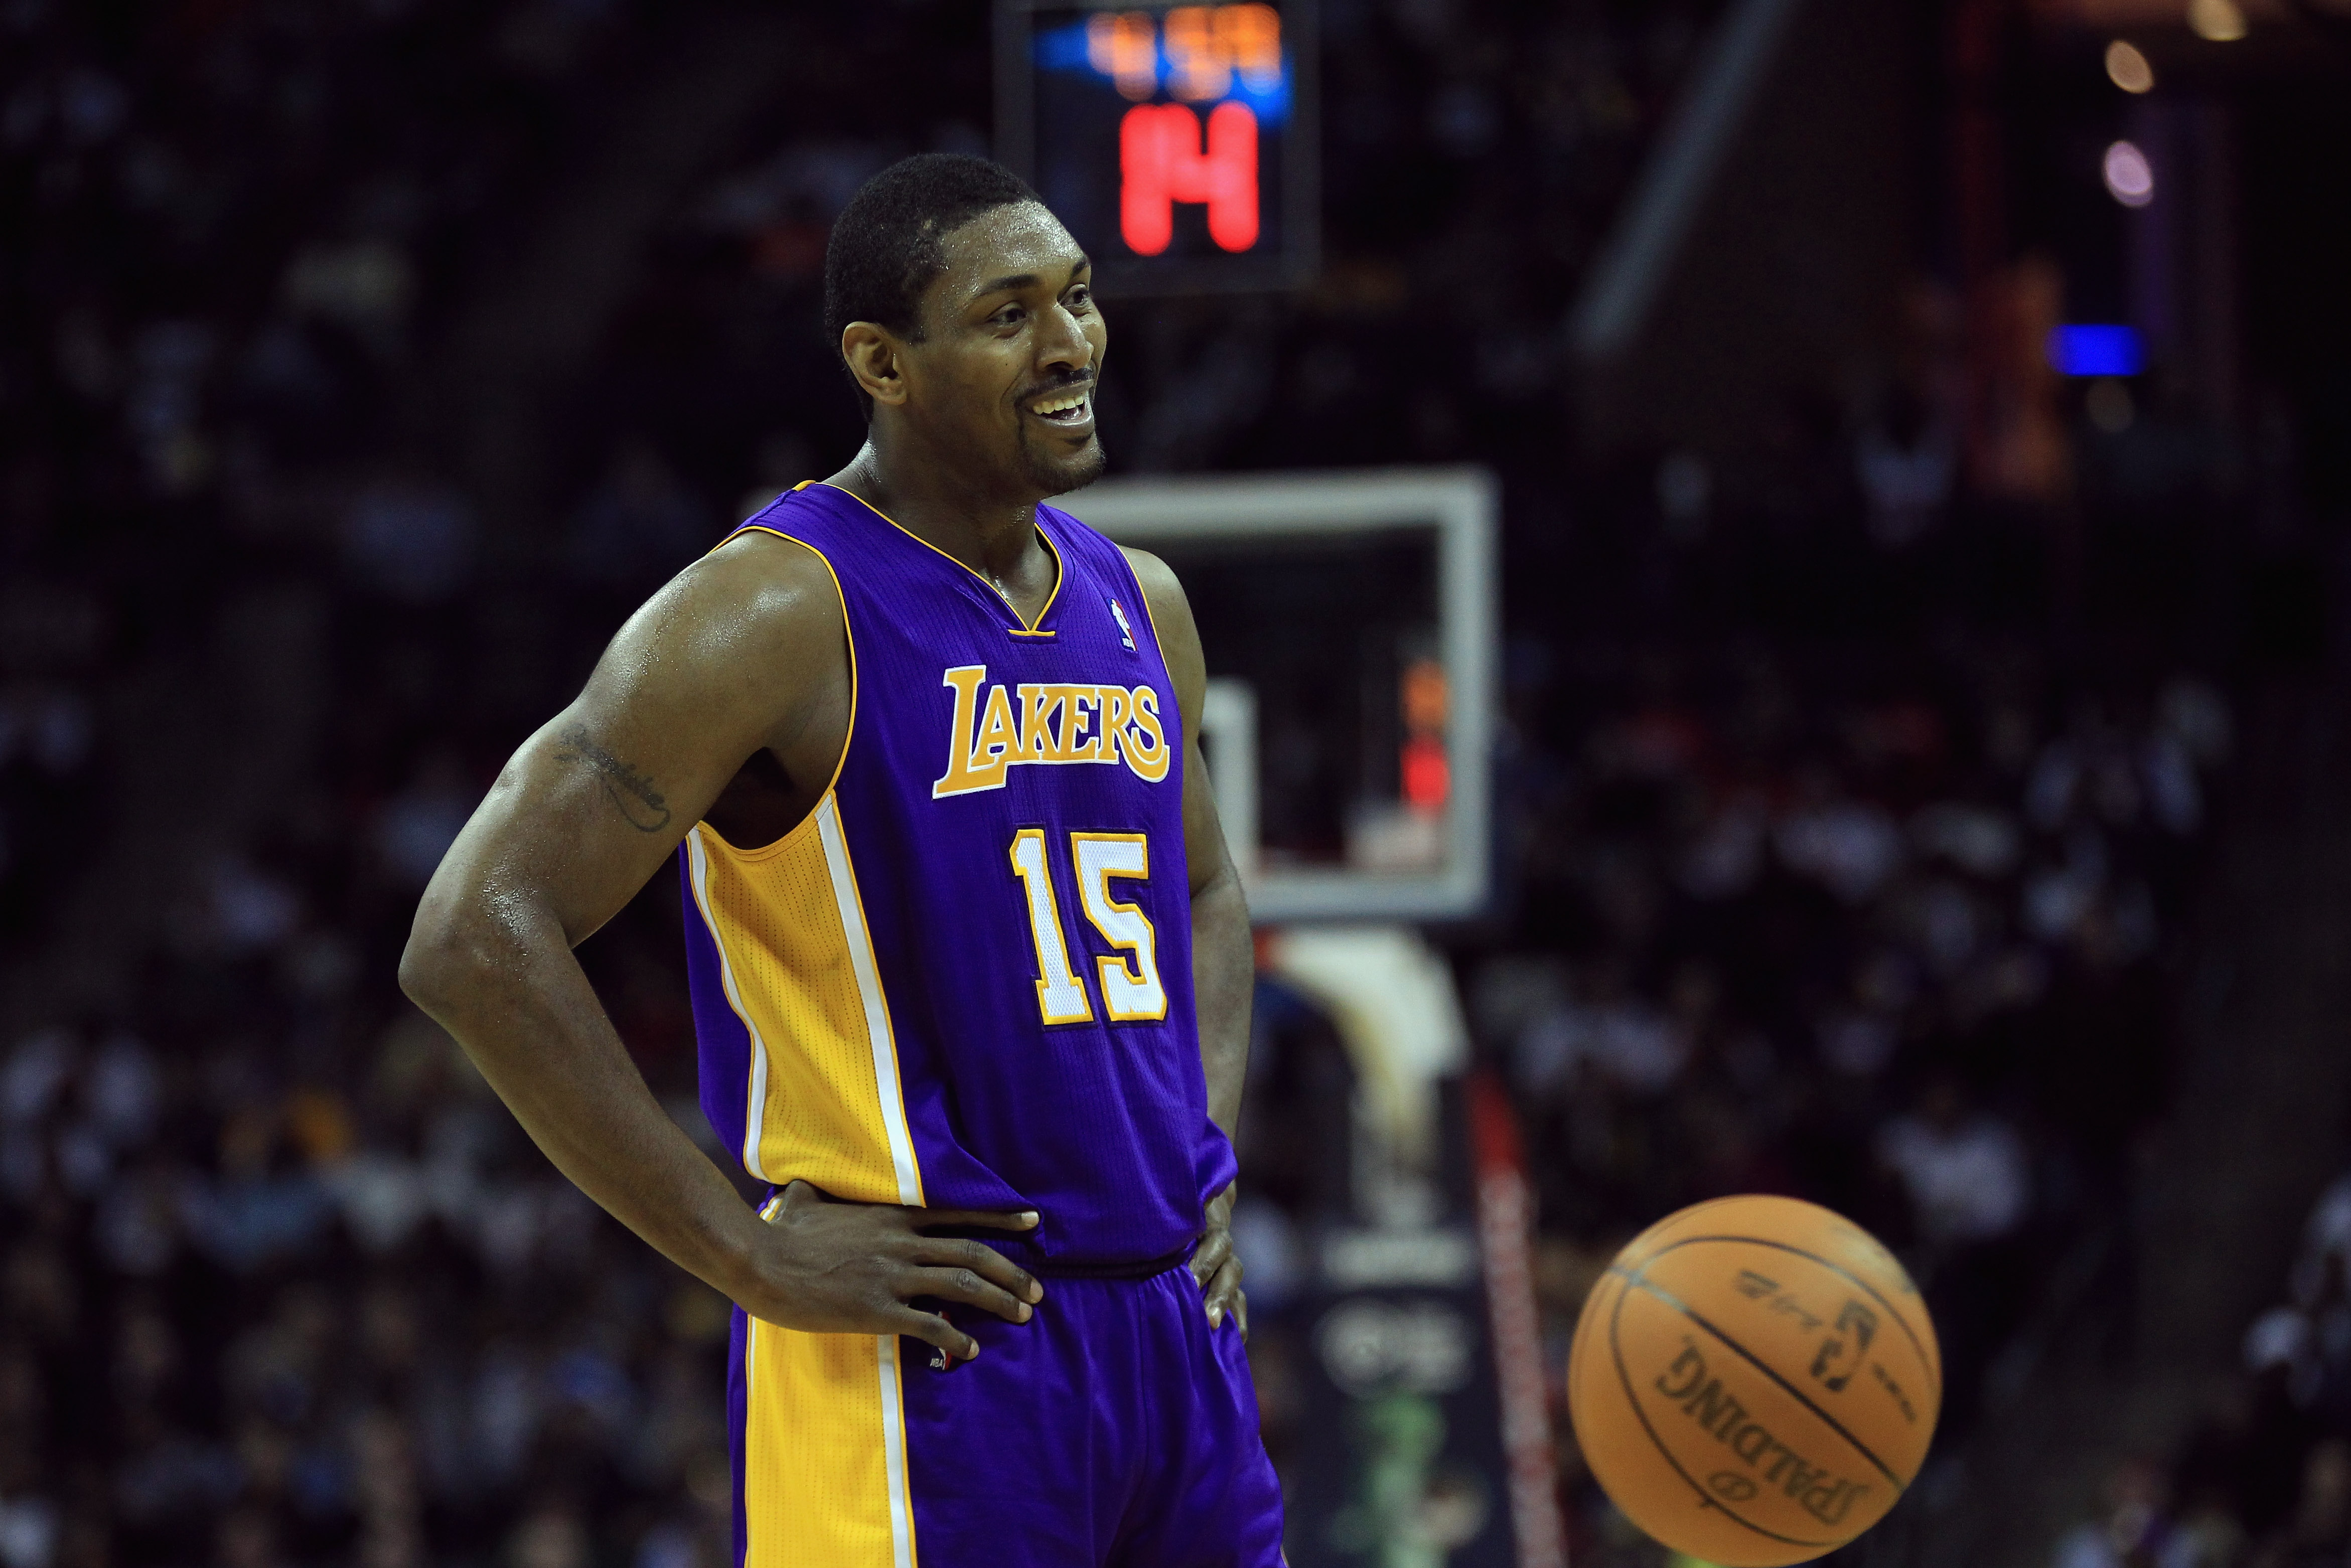 Lakers' Devin Ebanks And Andrew Bynum Fined By NBA